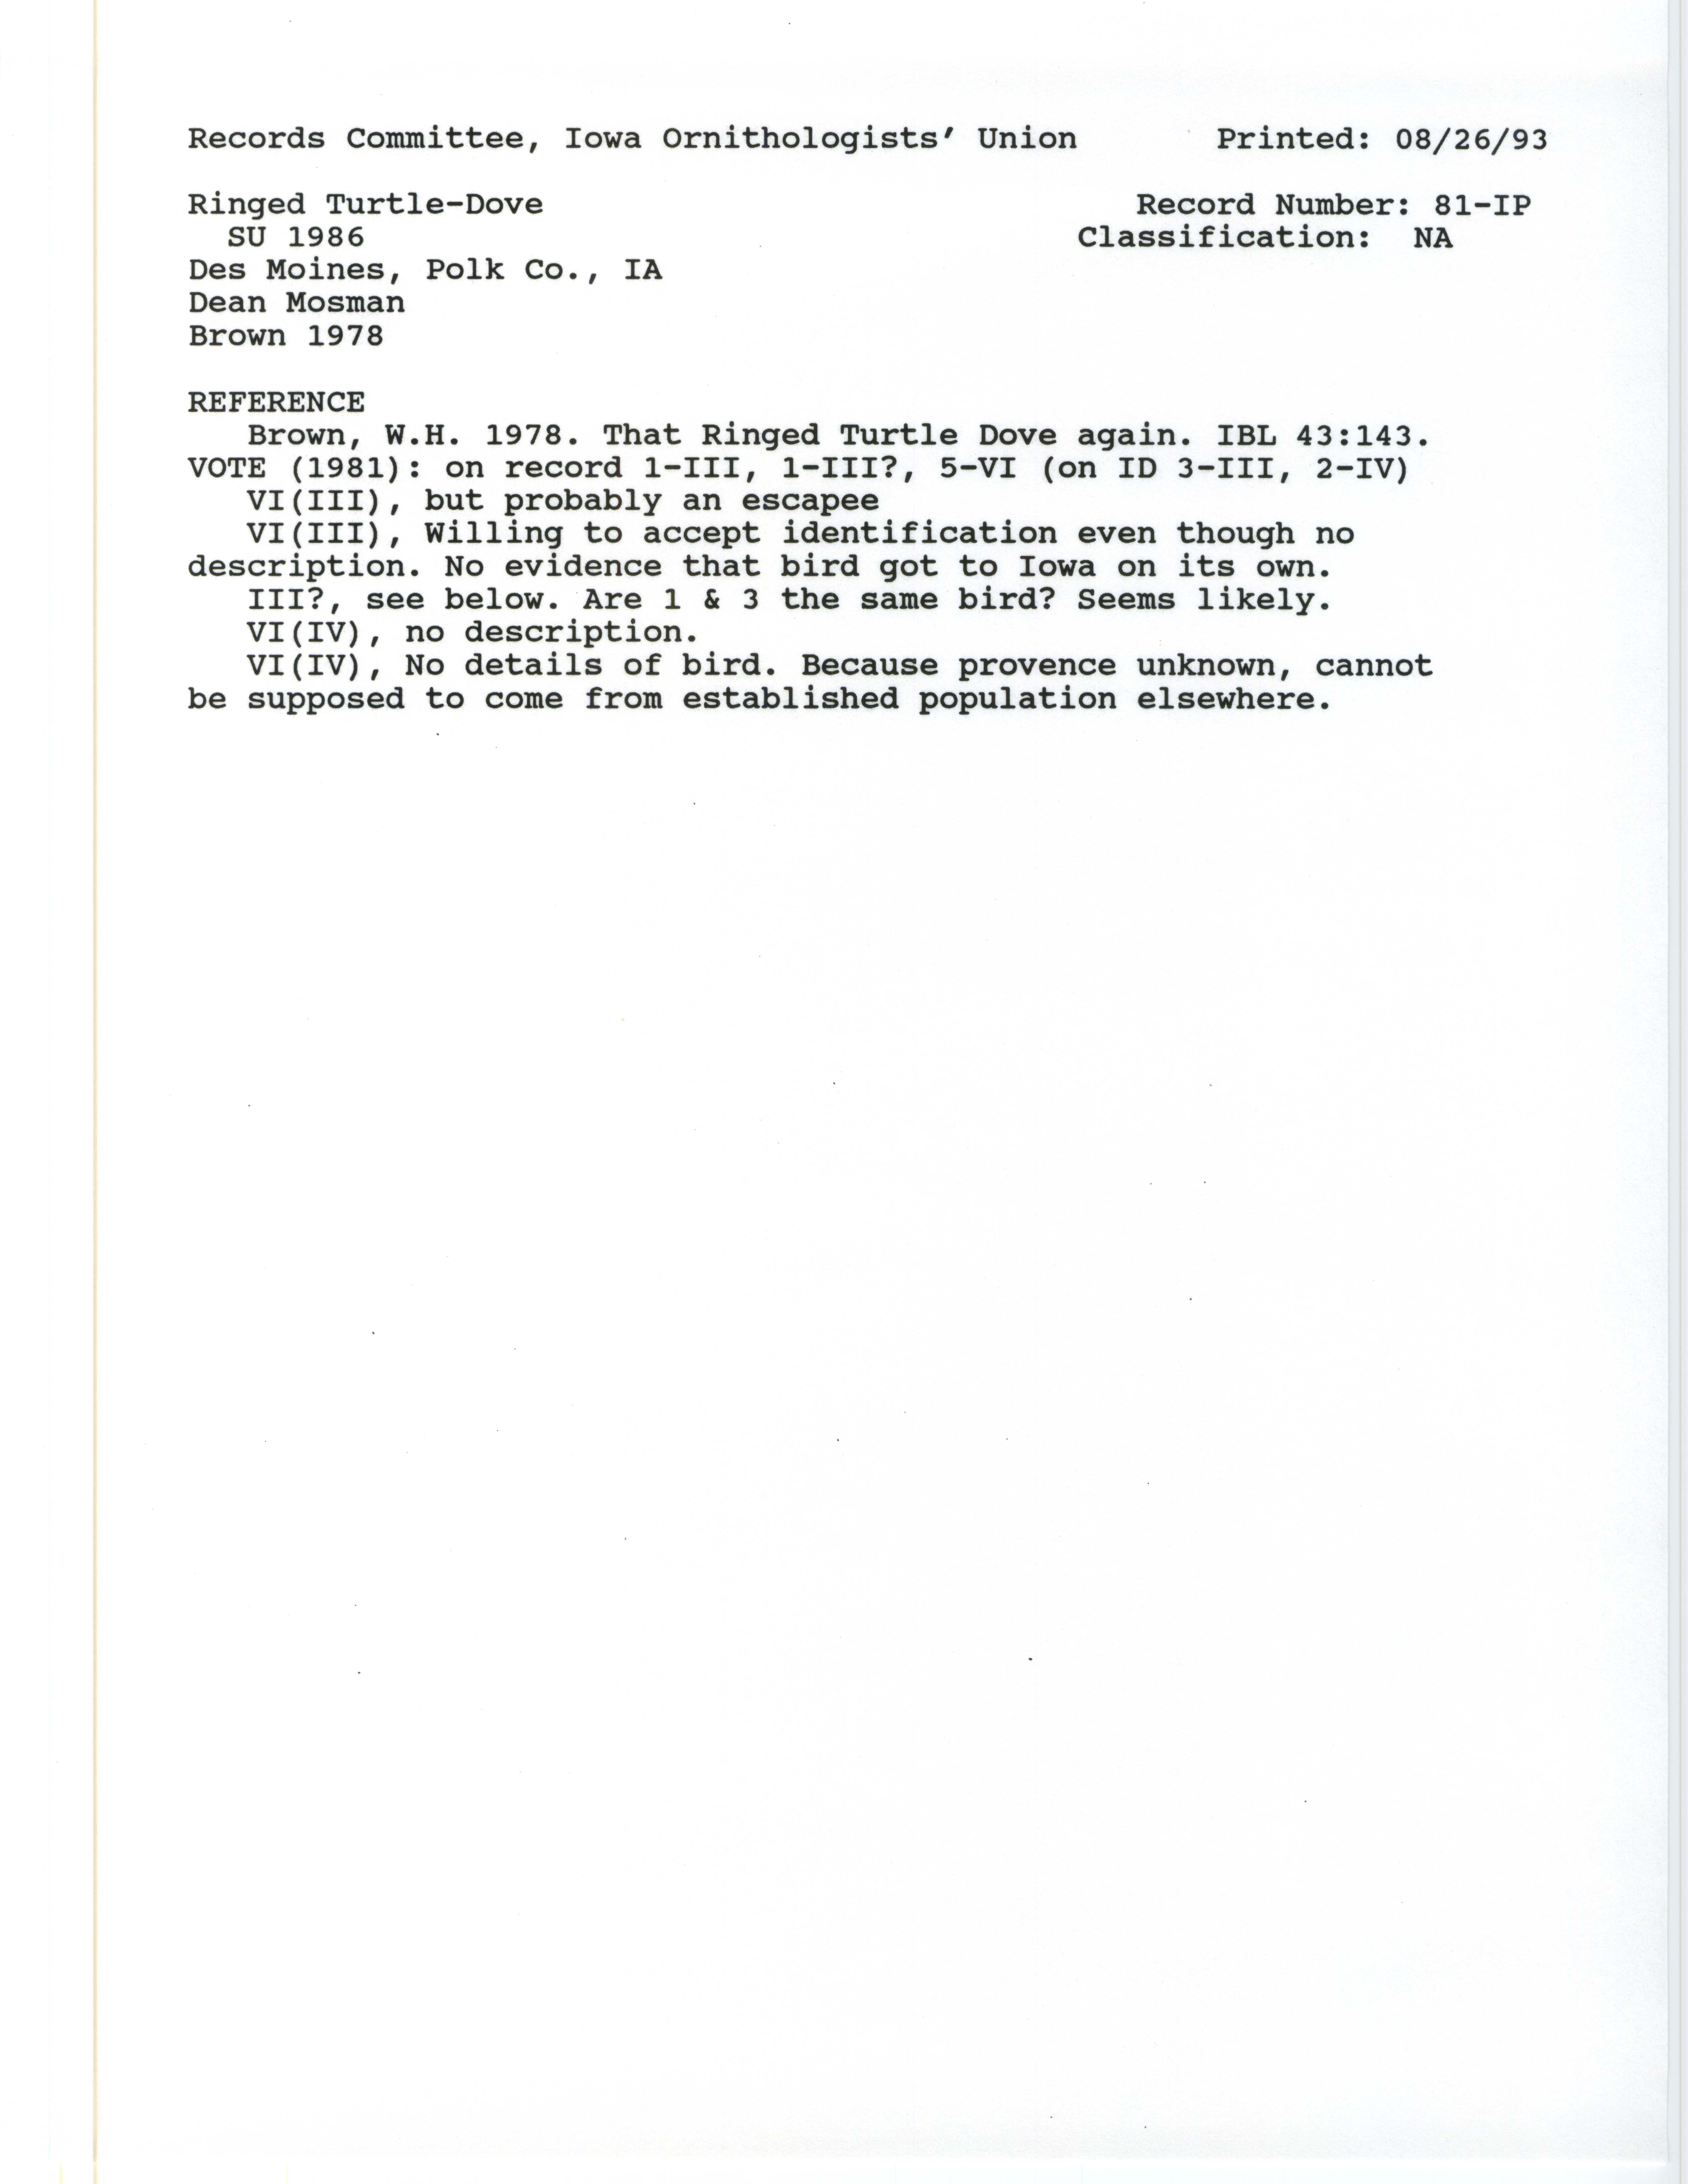 Records Committee review for rare bird sighting for Ringed Turtle-Dove at Des Moines in 1976